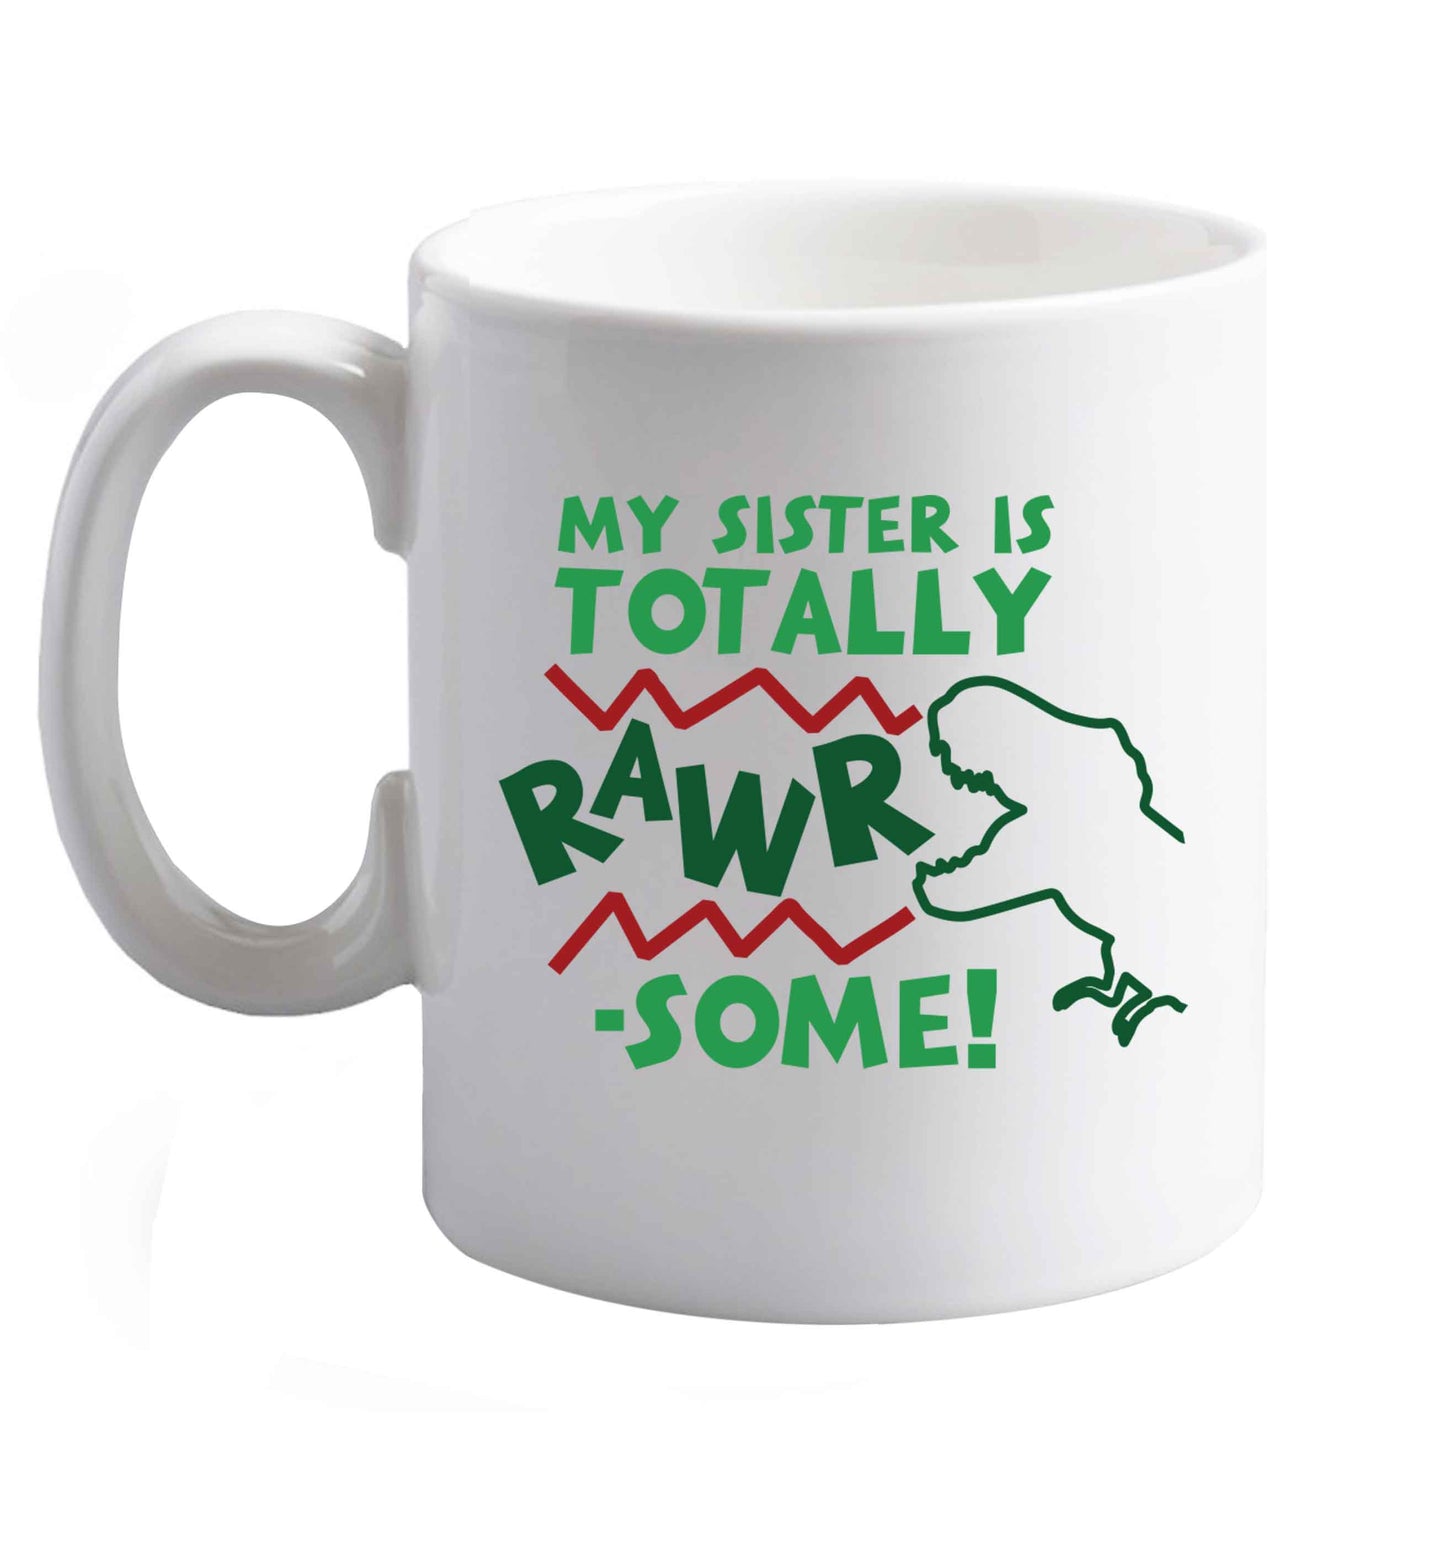 10 oz My sister is totally rawrsome ceramic mug right handed